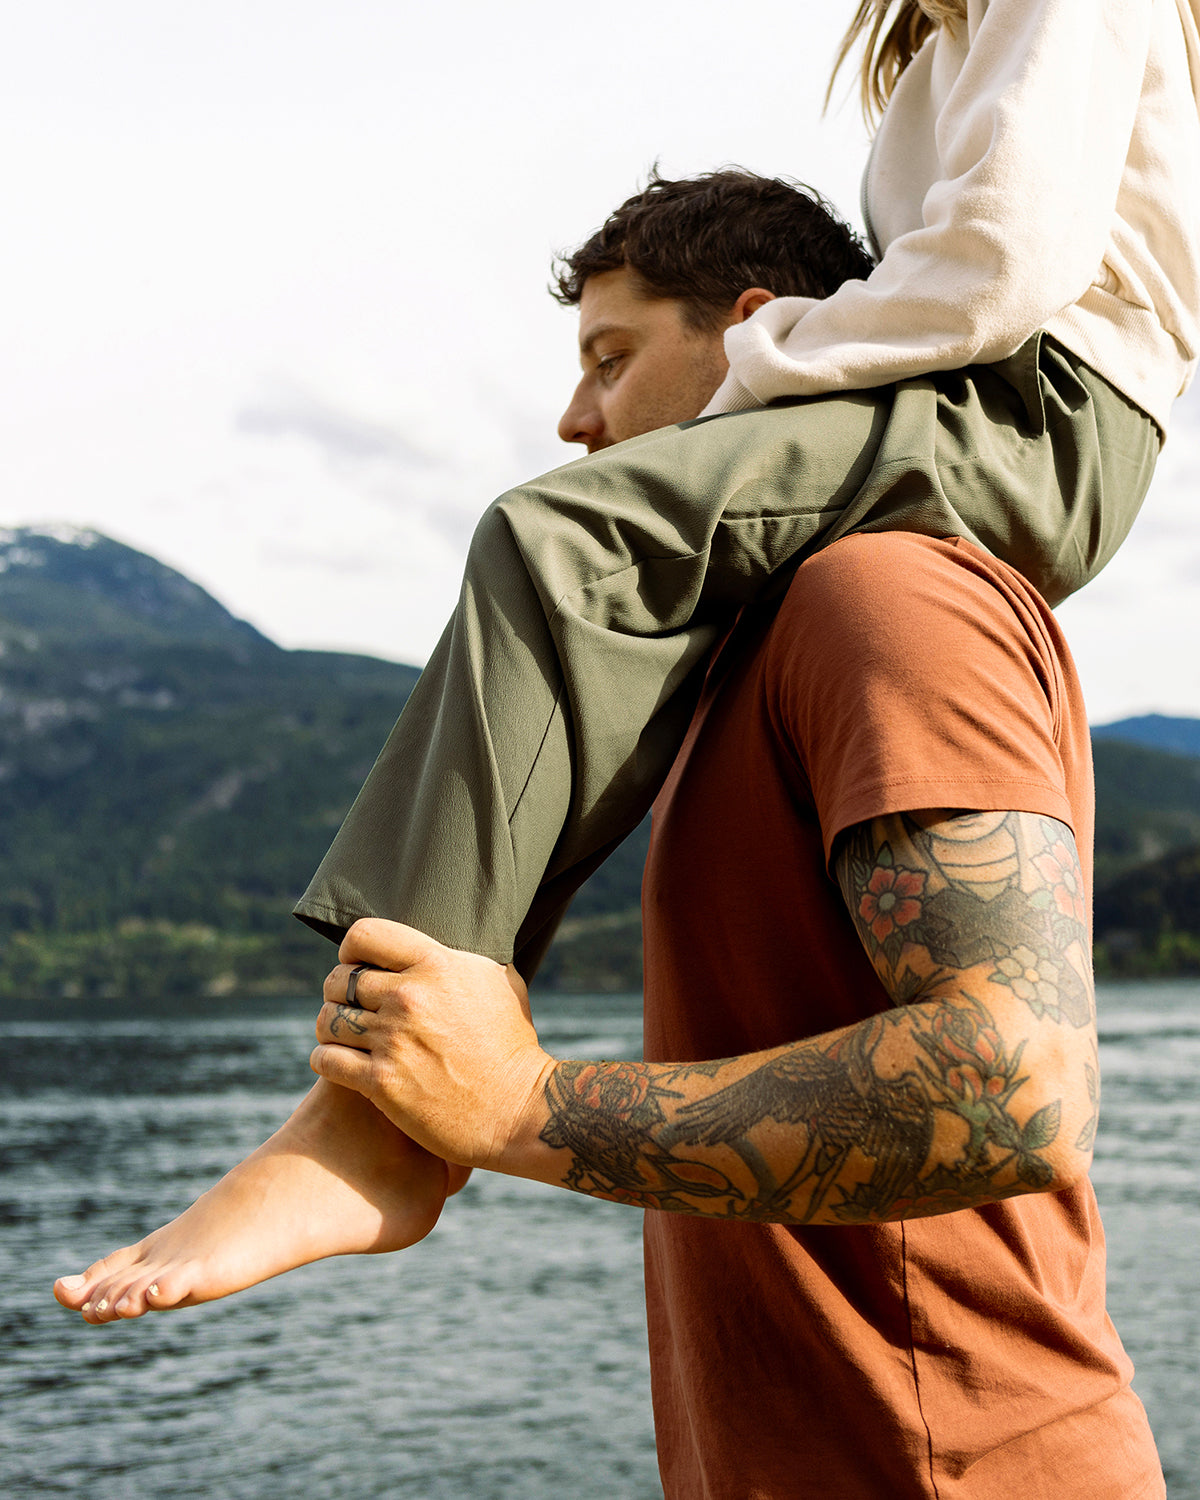 A man with arm tattoos carries a woman on his shoulders by a large scenic lake.